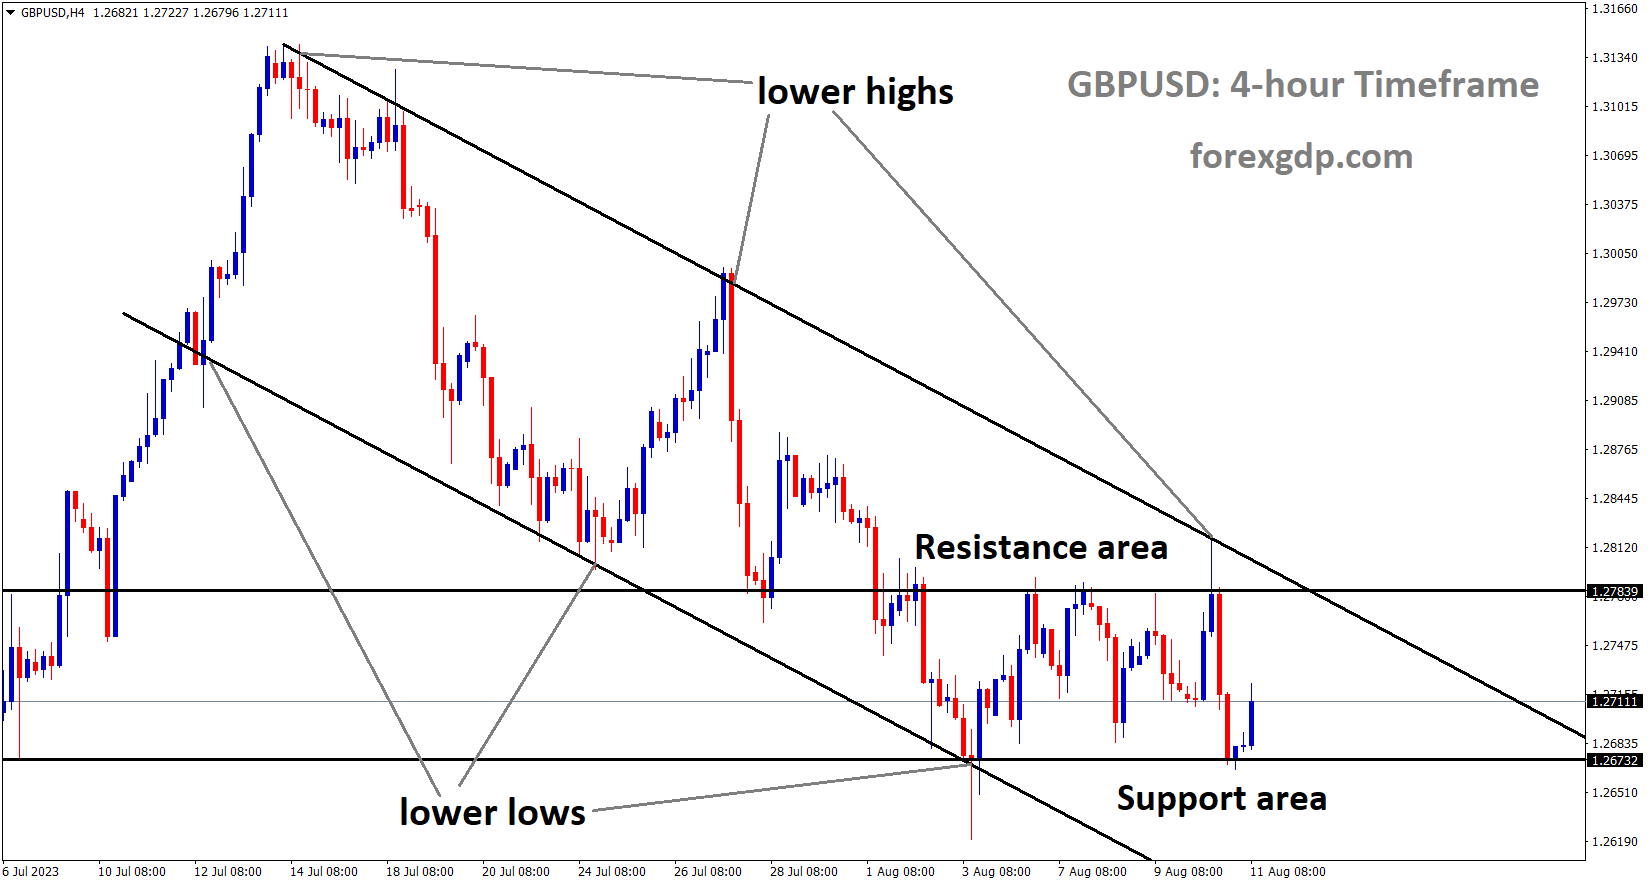 GBPUSD is moving in the Descending channel and the market has rebounded from the minor box pattern of the channel